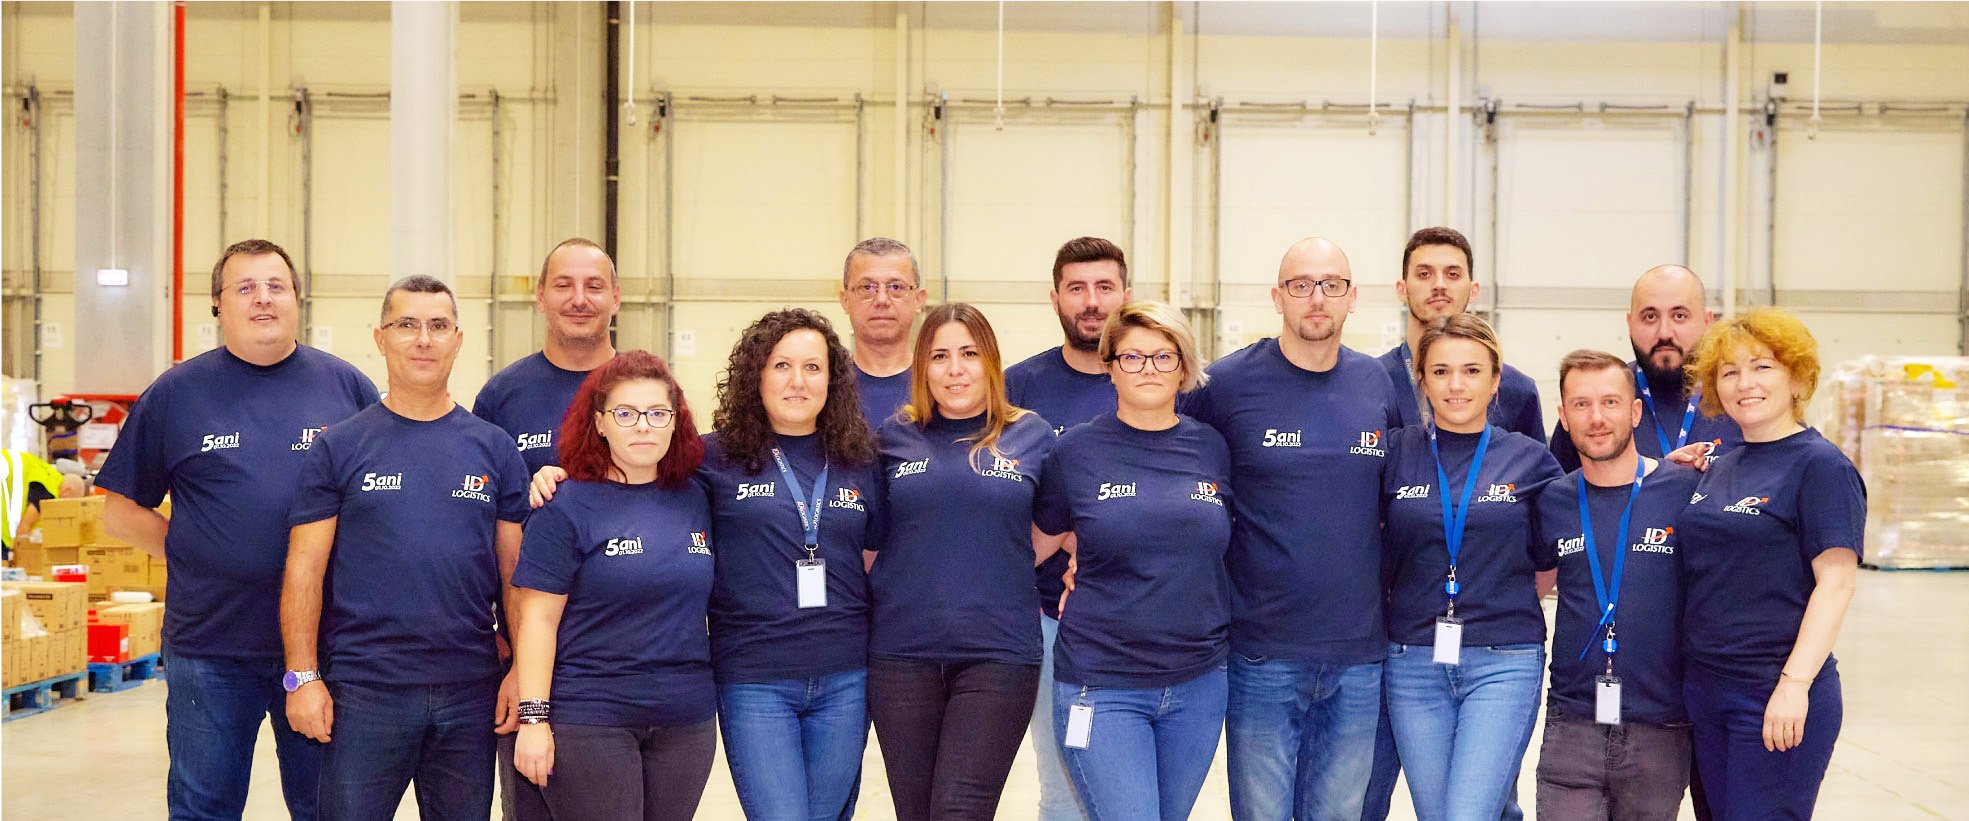 Group of ID Logistics employees in a warehouse.